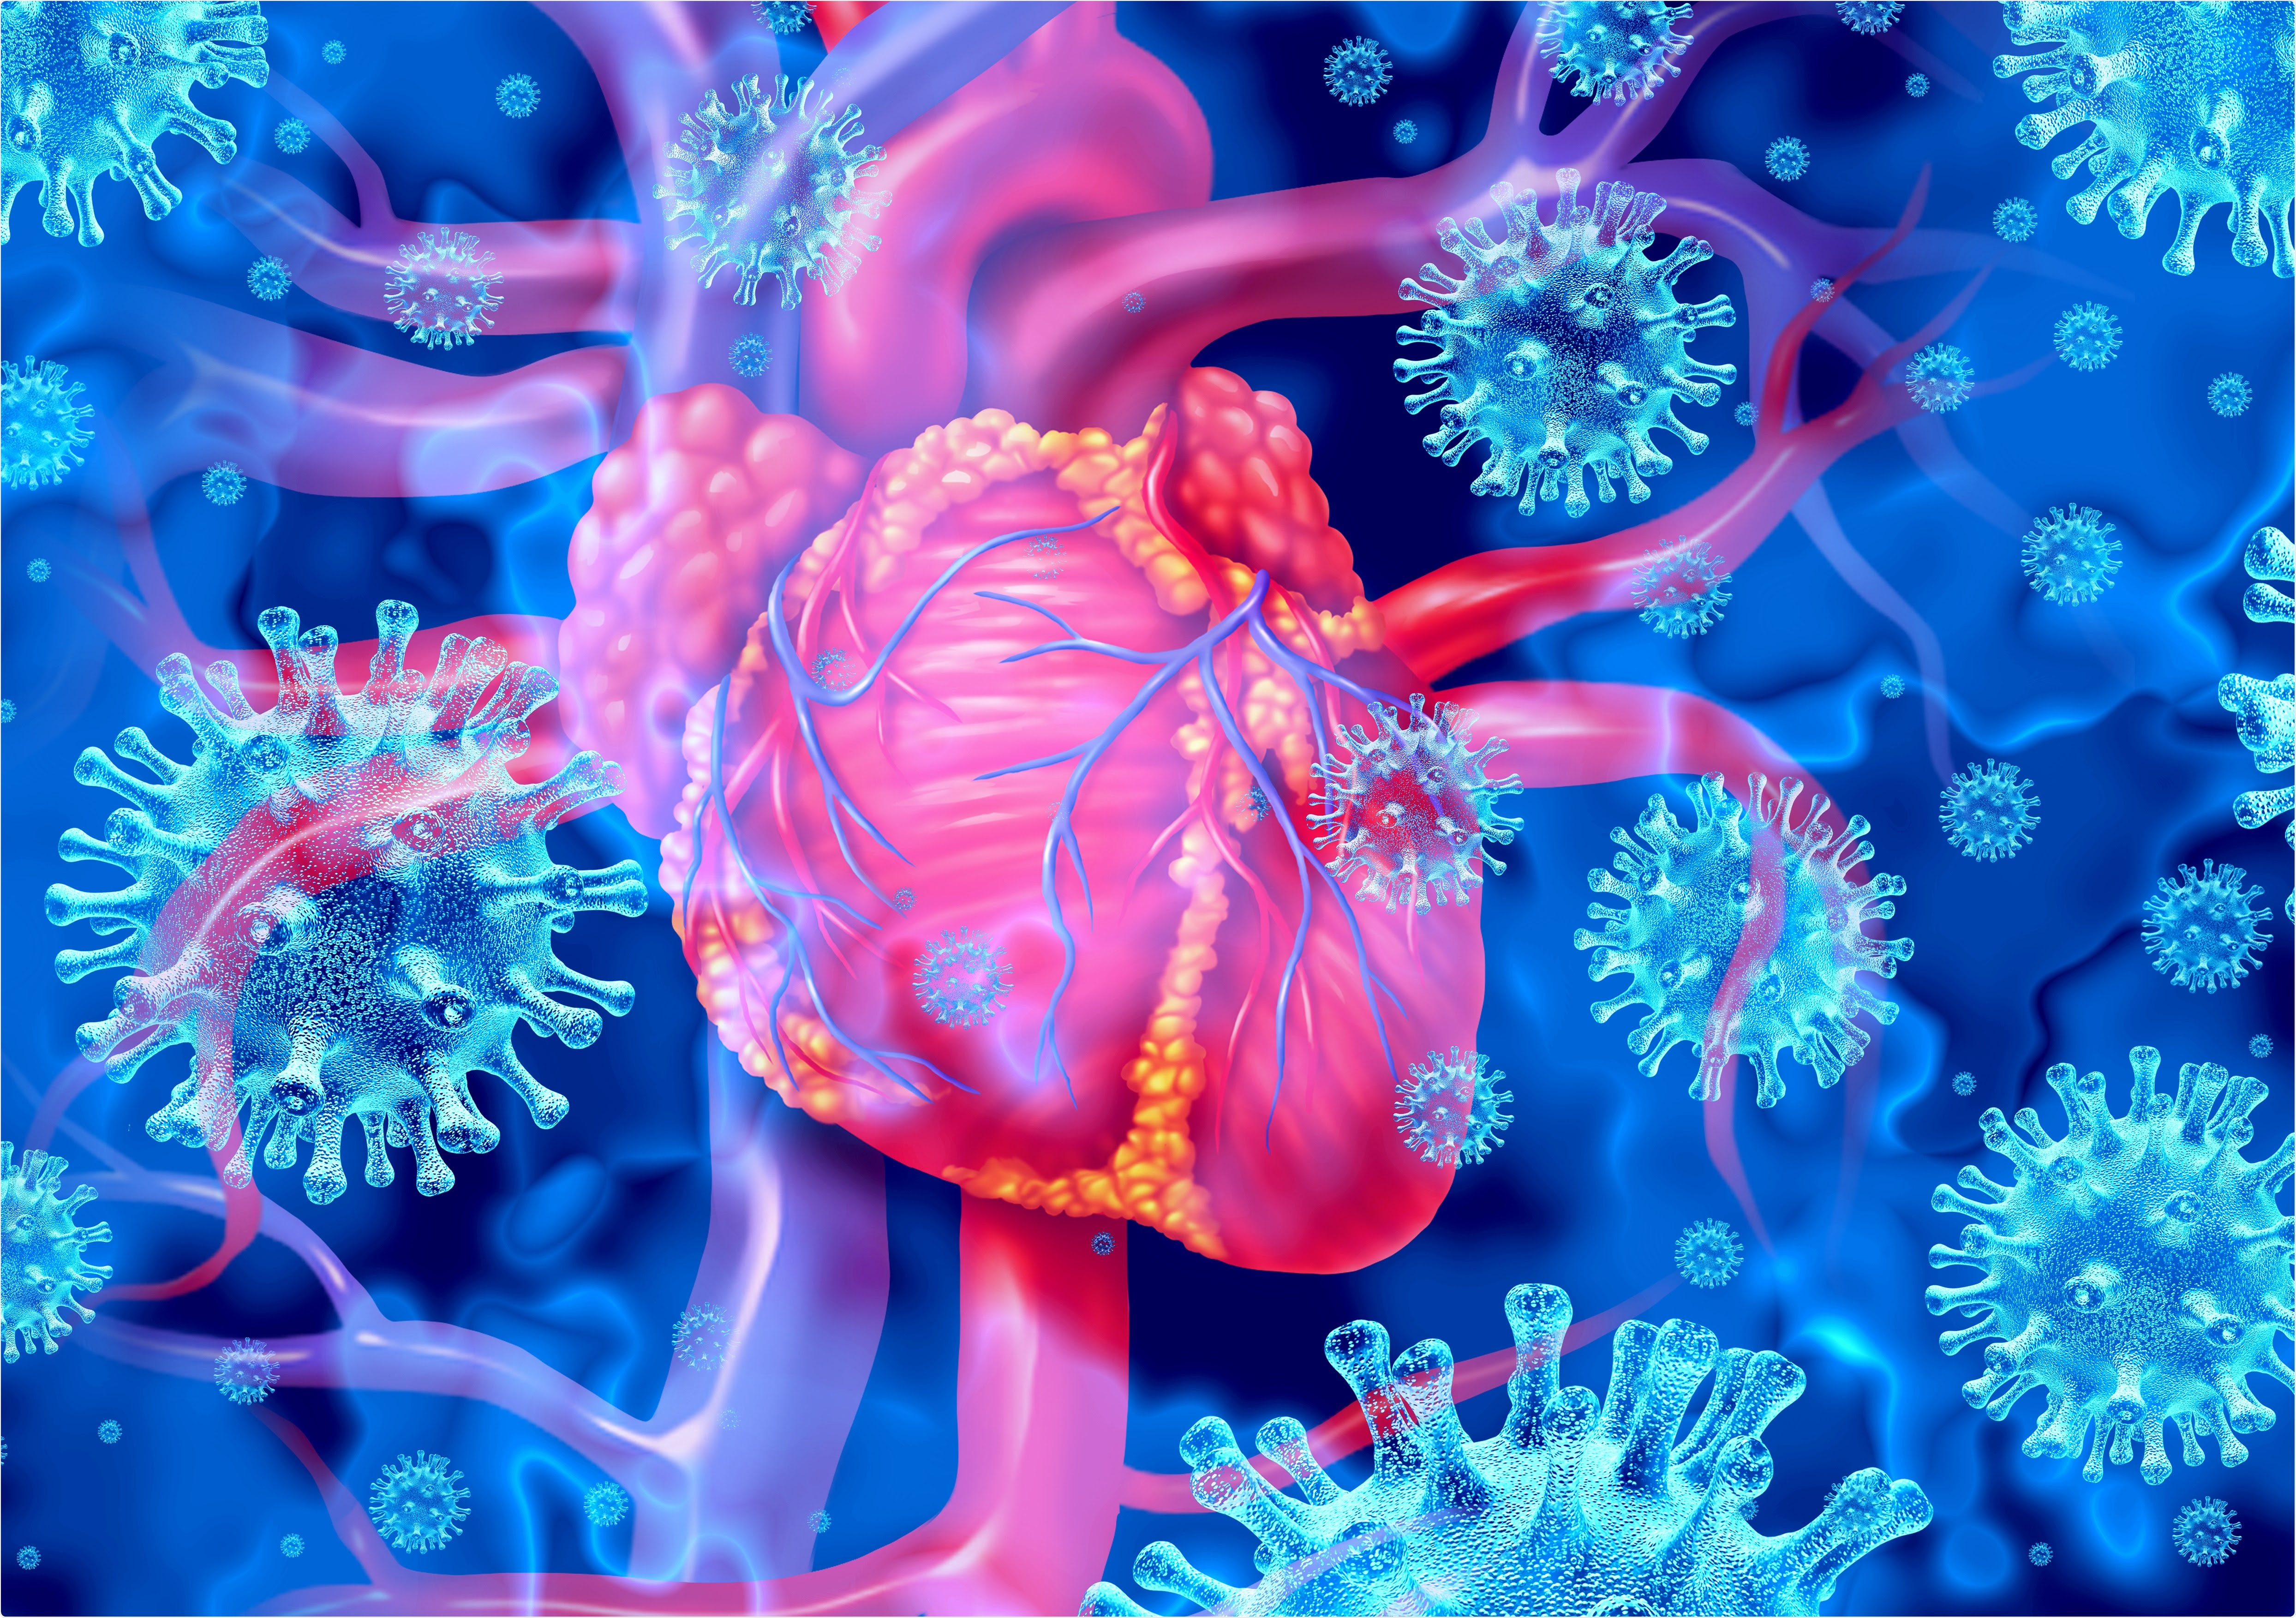 Study: Reports of myocarditis and pericarditis following mRNA COVID-19 vaccines: A review of spontaneously reported data from the UK, Europe, and the US. Image Credit: Lightspring / Shutterstock